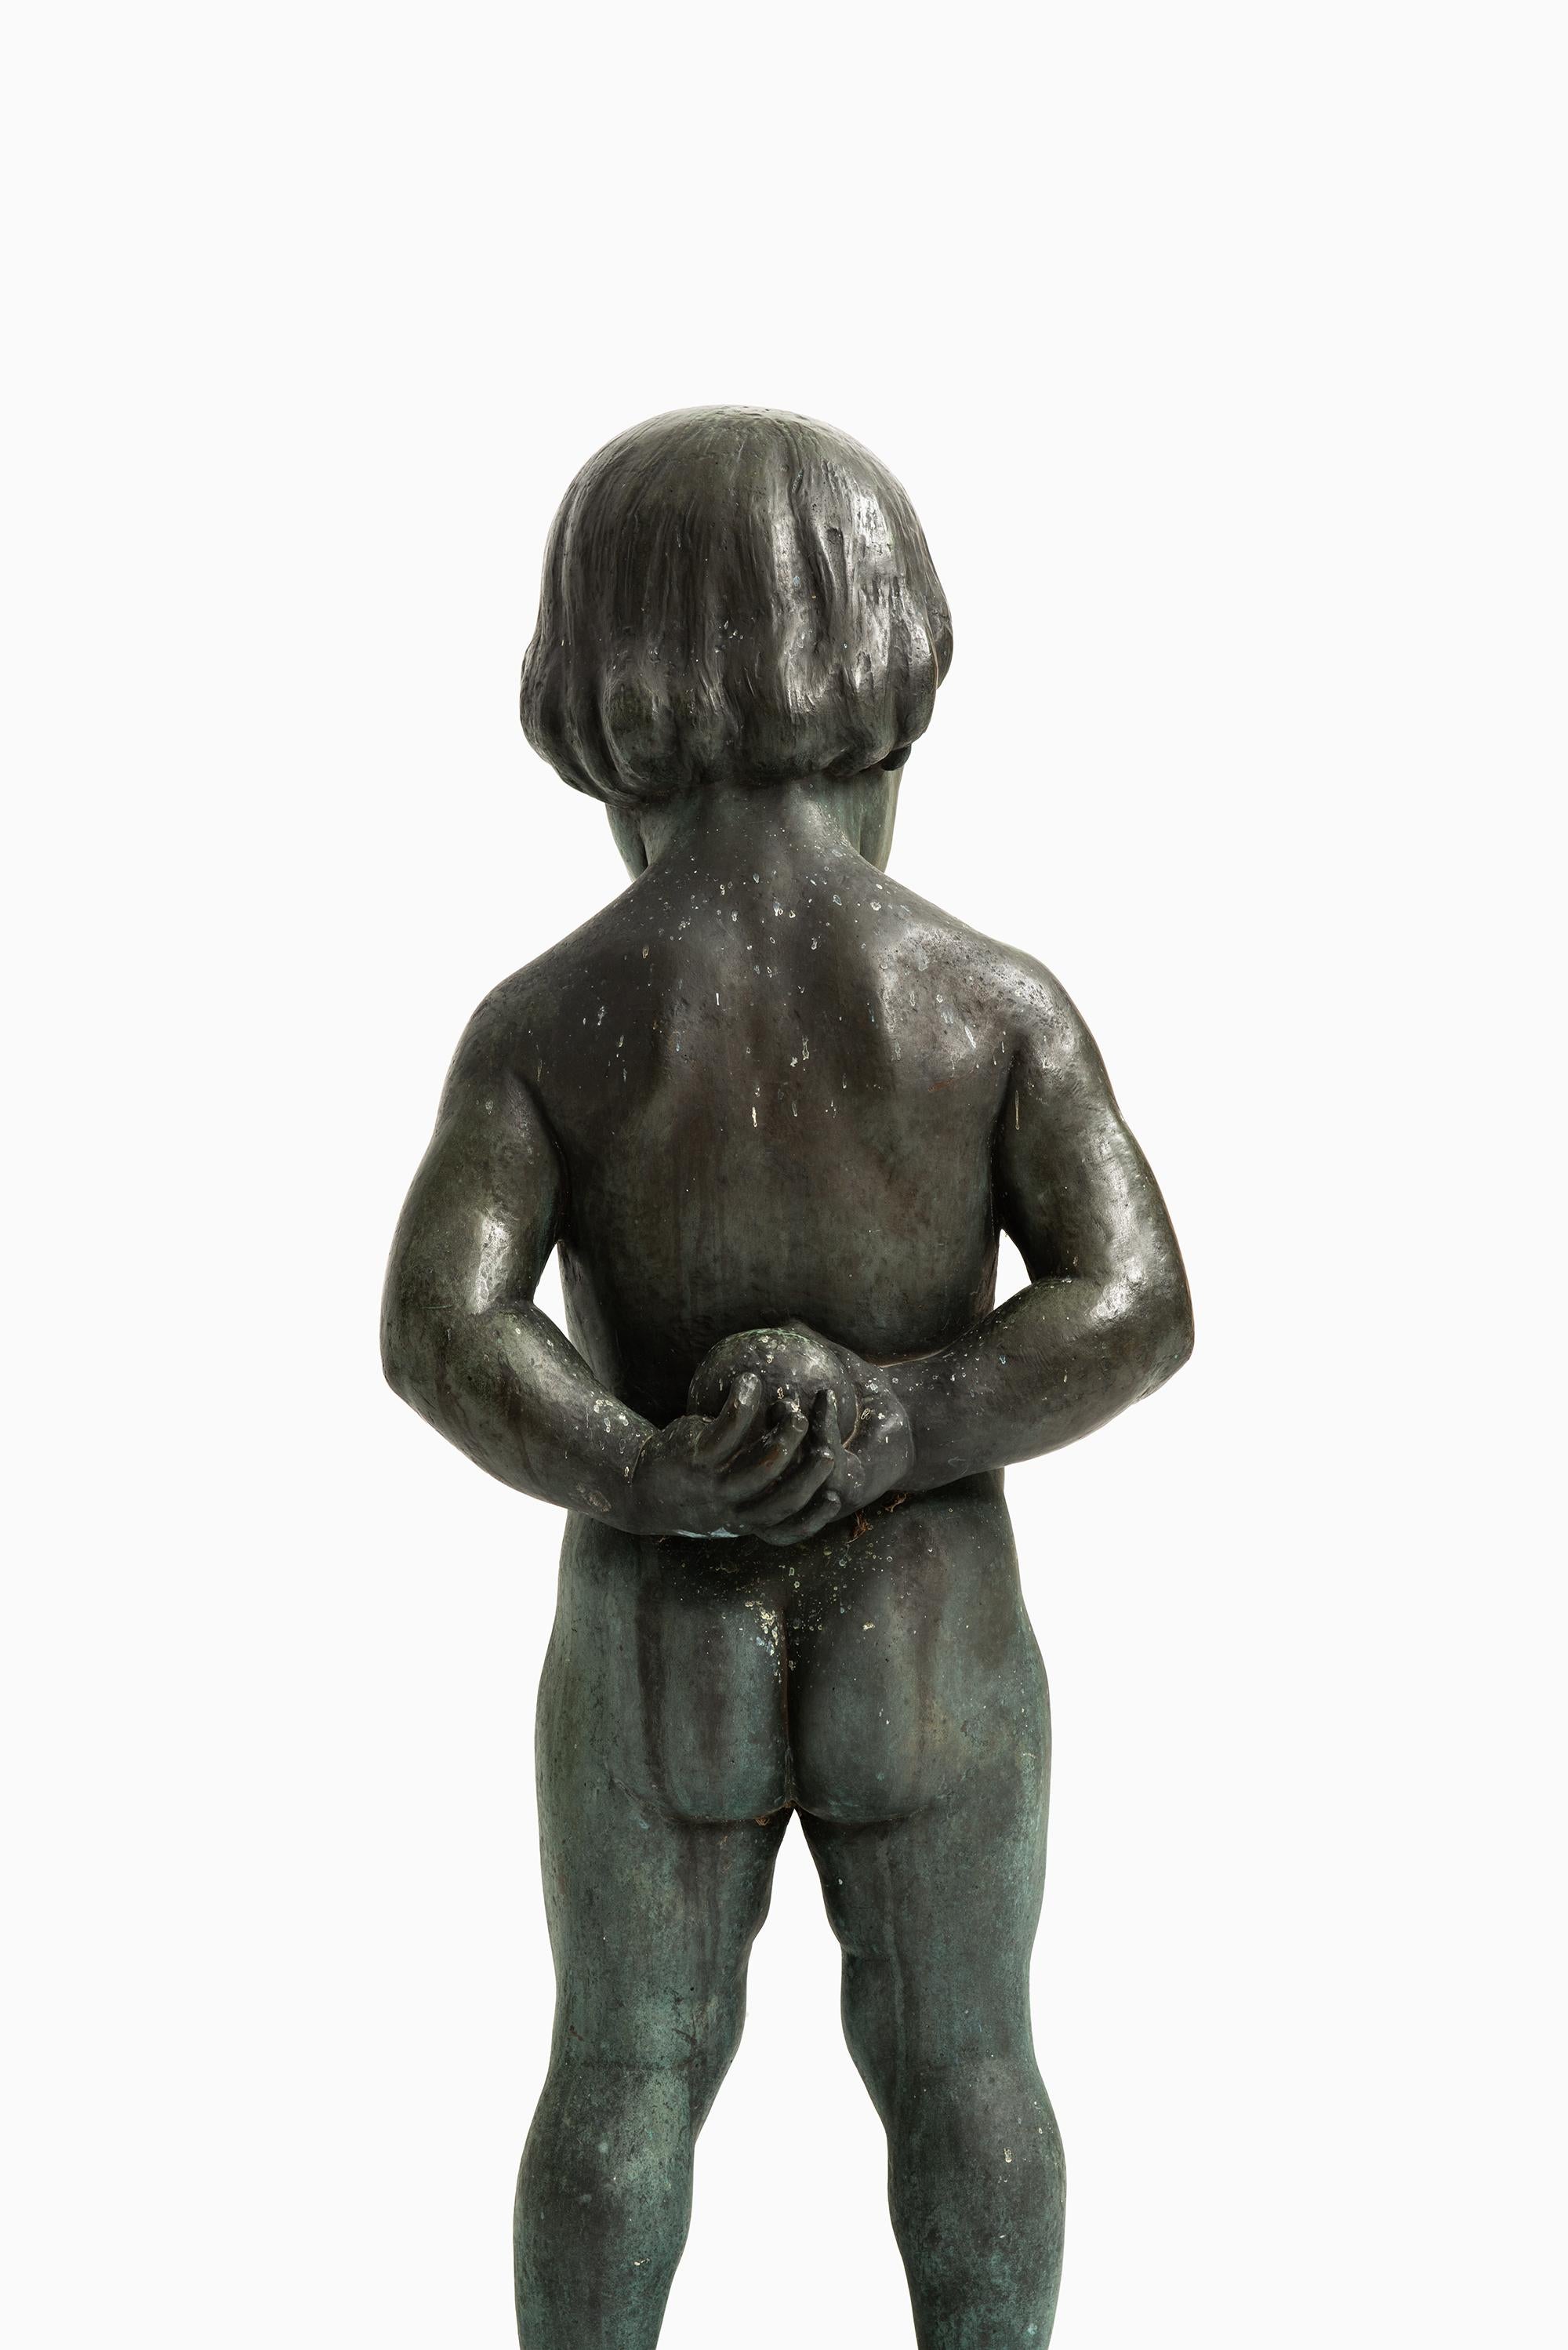 Anders Jönsson Sculpture 'Boy with Apple' by Erik Pettersson Fud, in Sweden In Good Condition For Sale In Limhamn, Skåne län